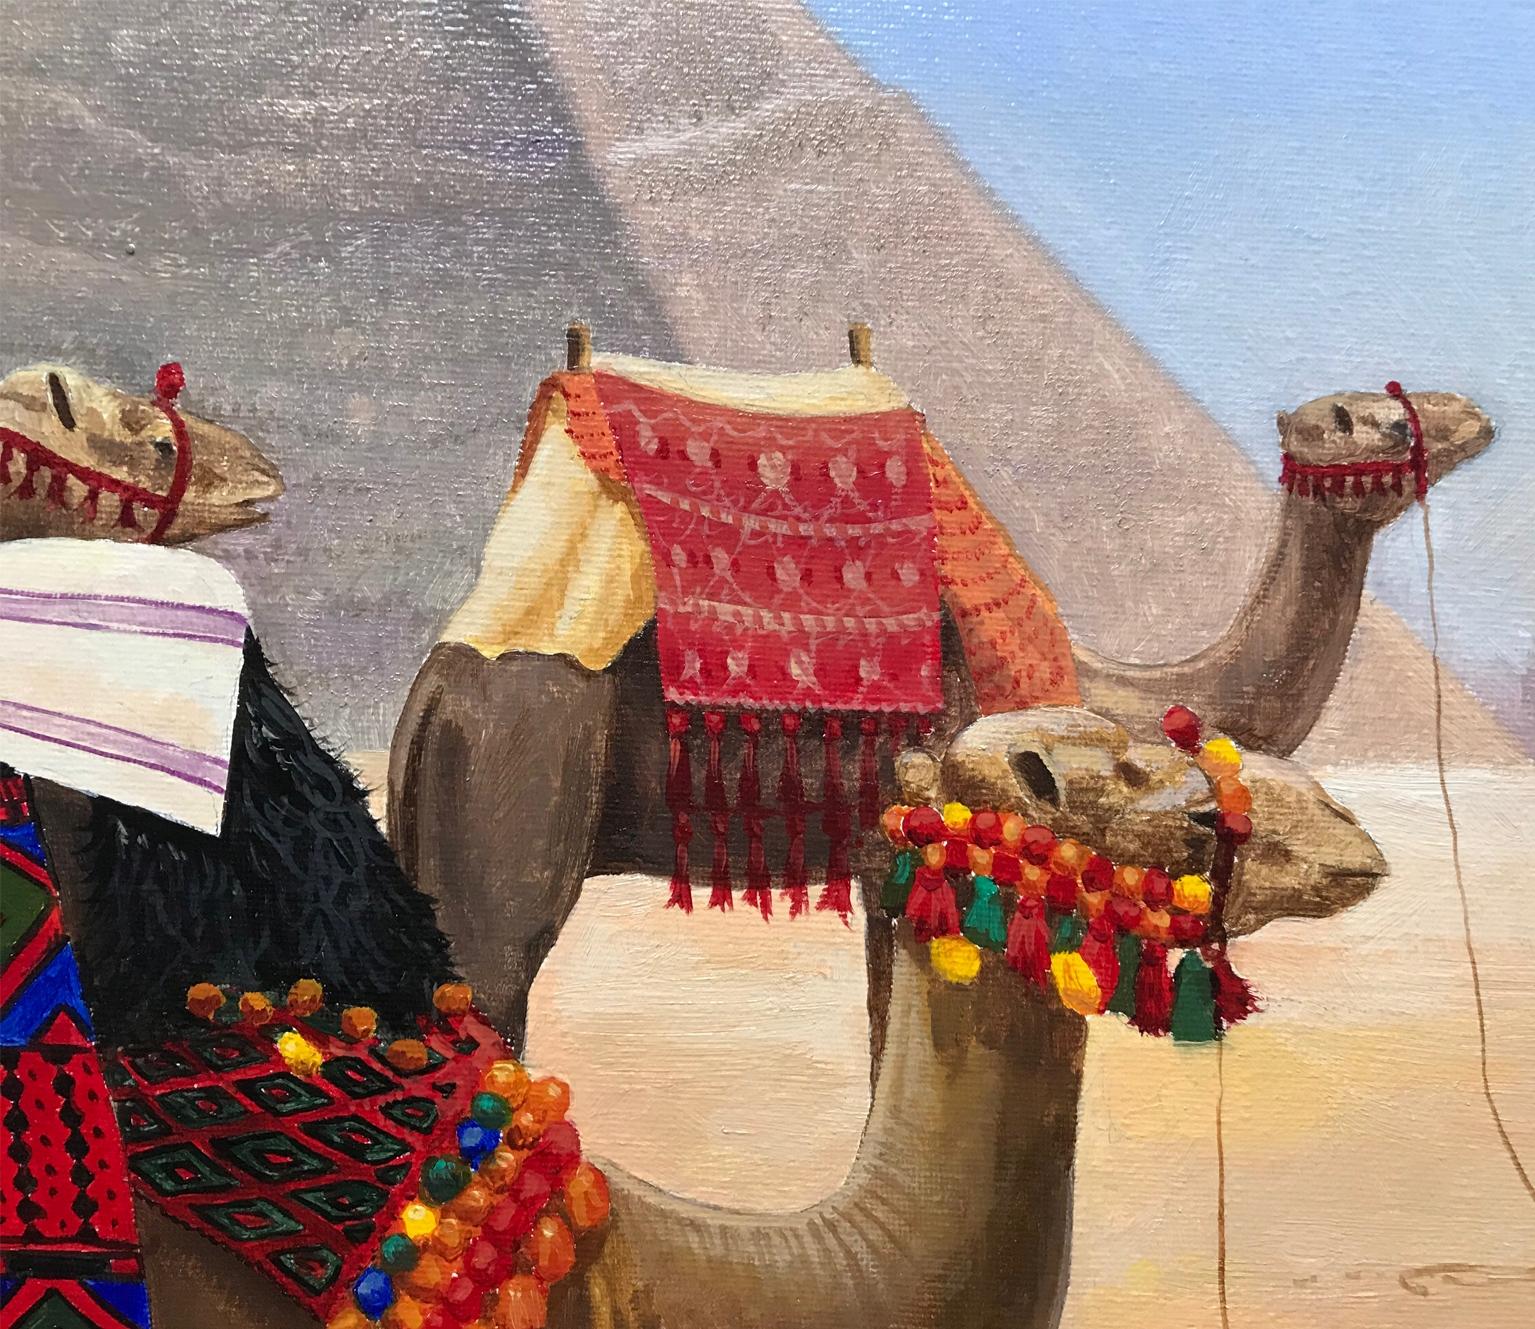 LANDSCAPE - CAMELS IN DESERT - Realist Painting by Miguel Angel